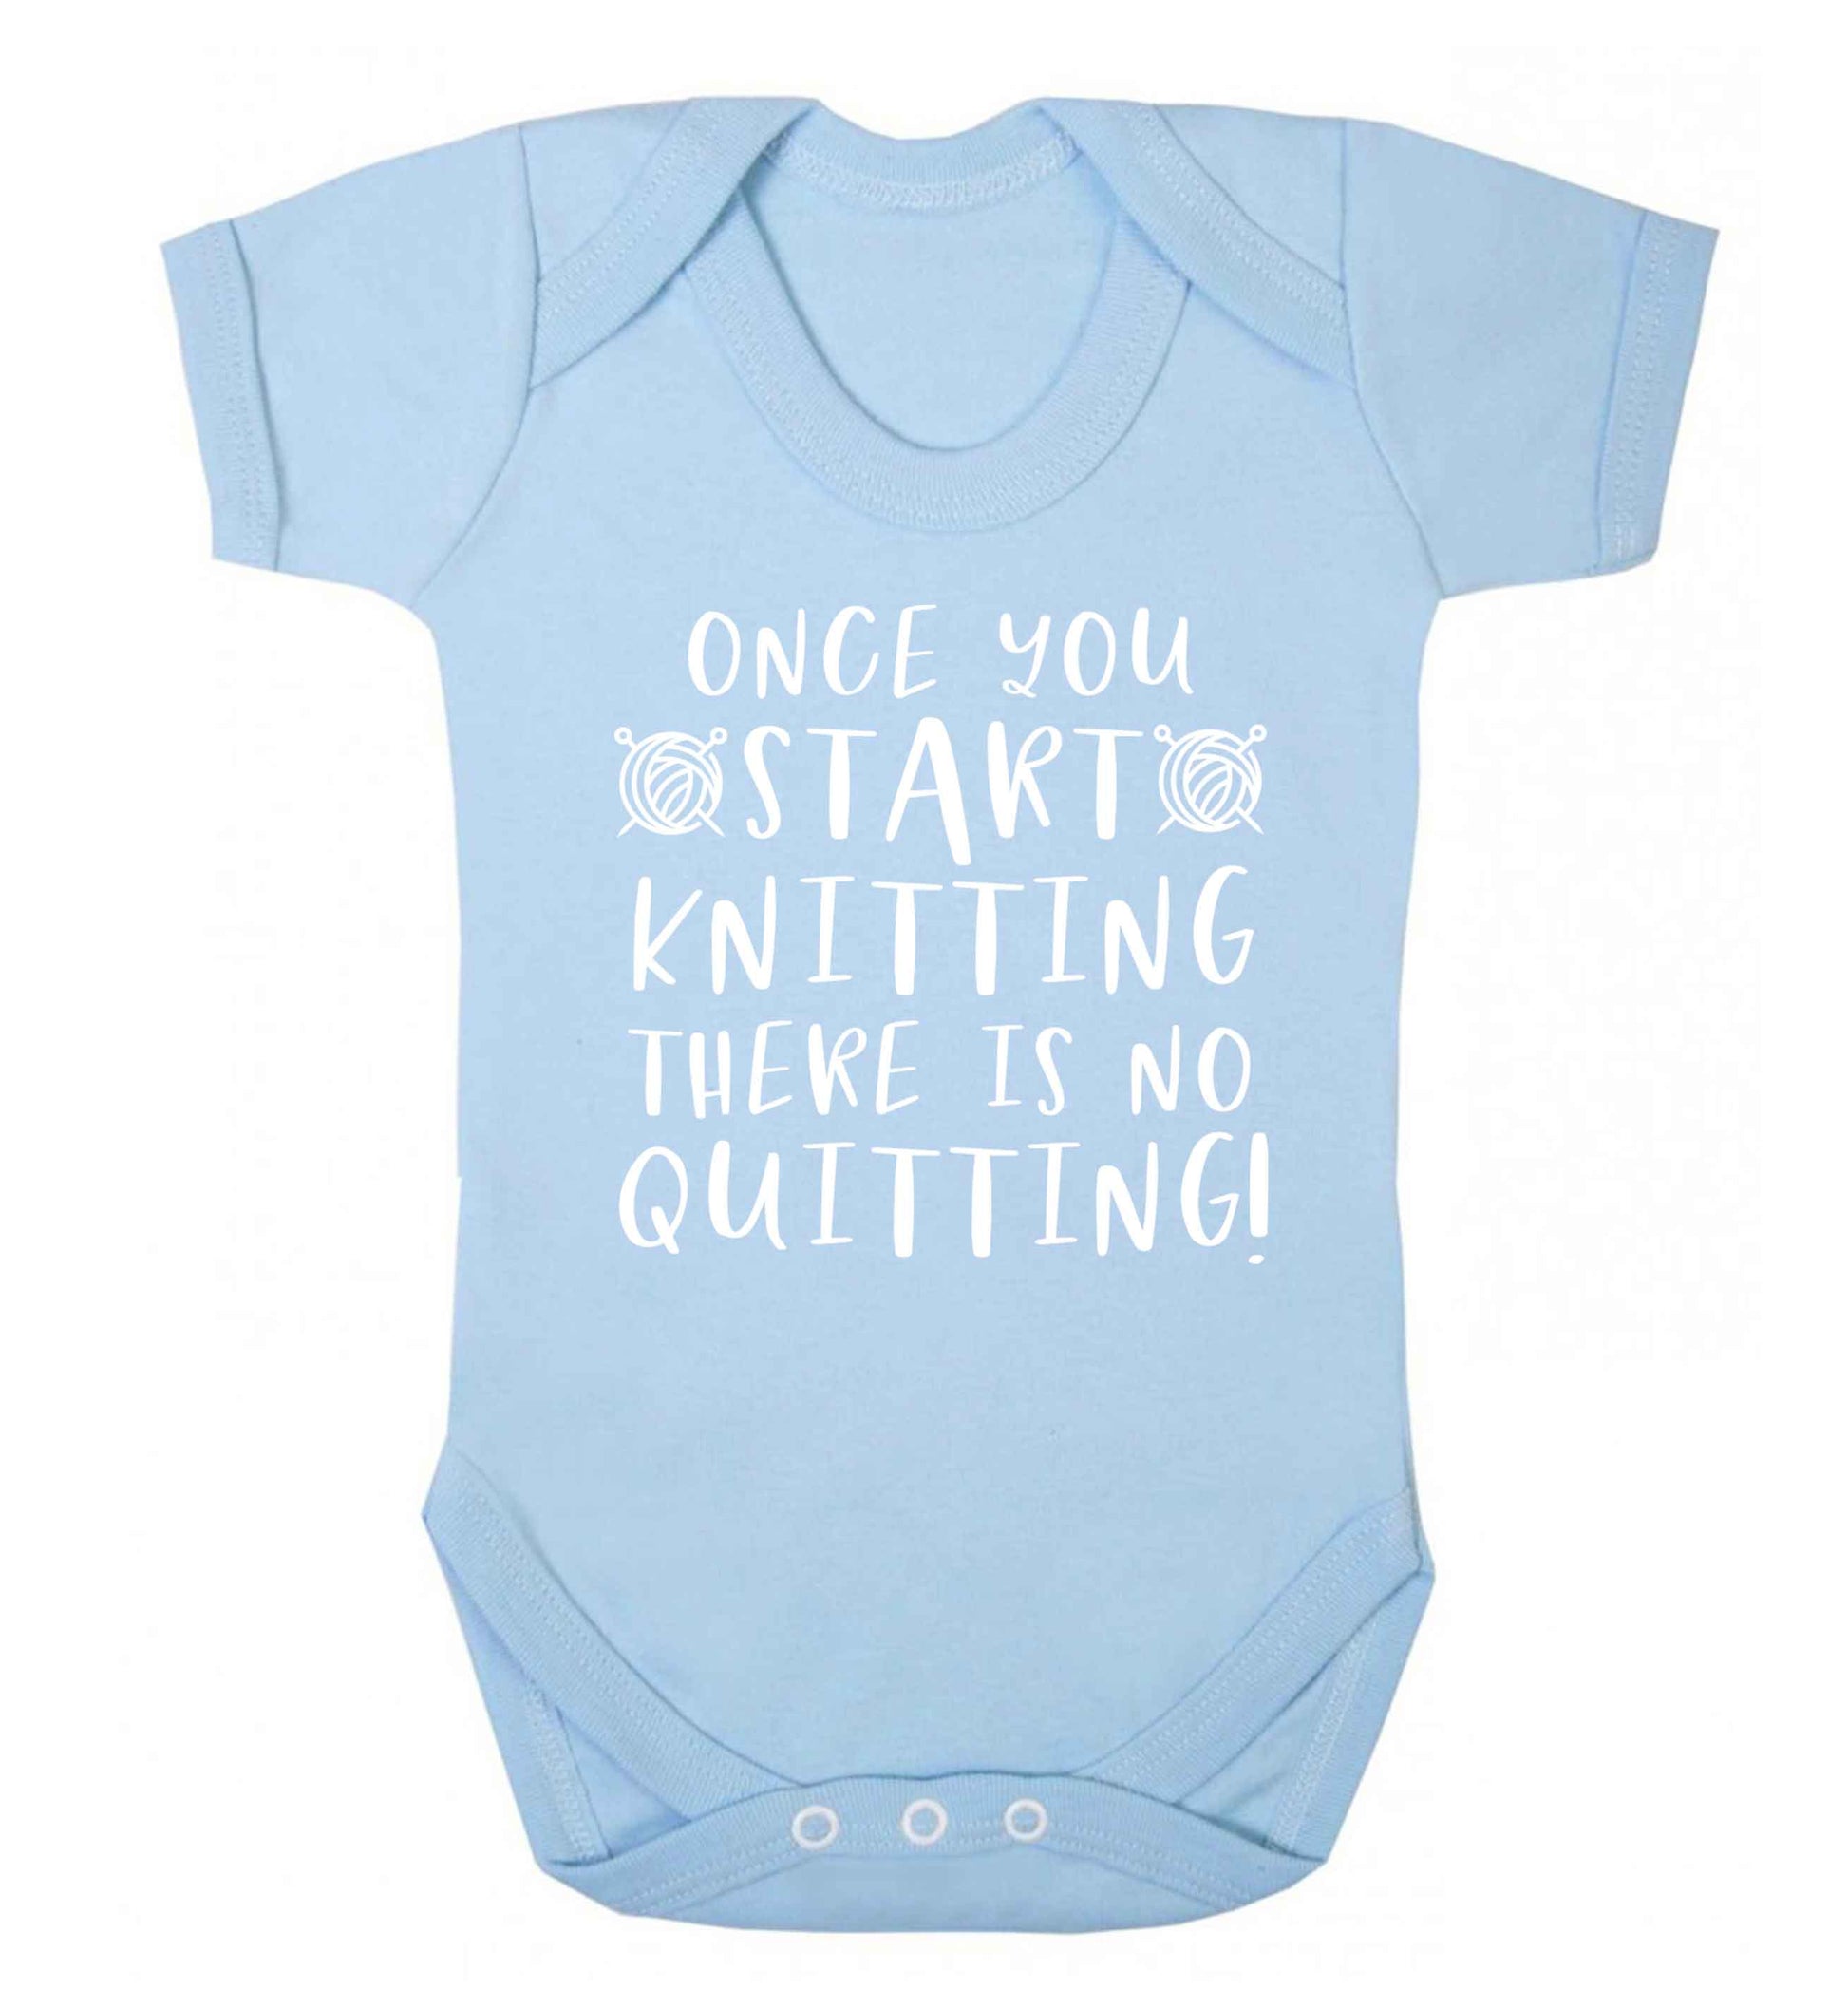 Once you start knitting there is no quitting! Baby Vest pale blue 18-24 months